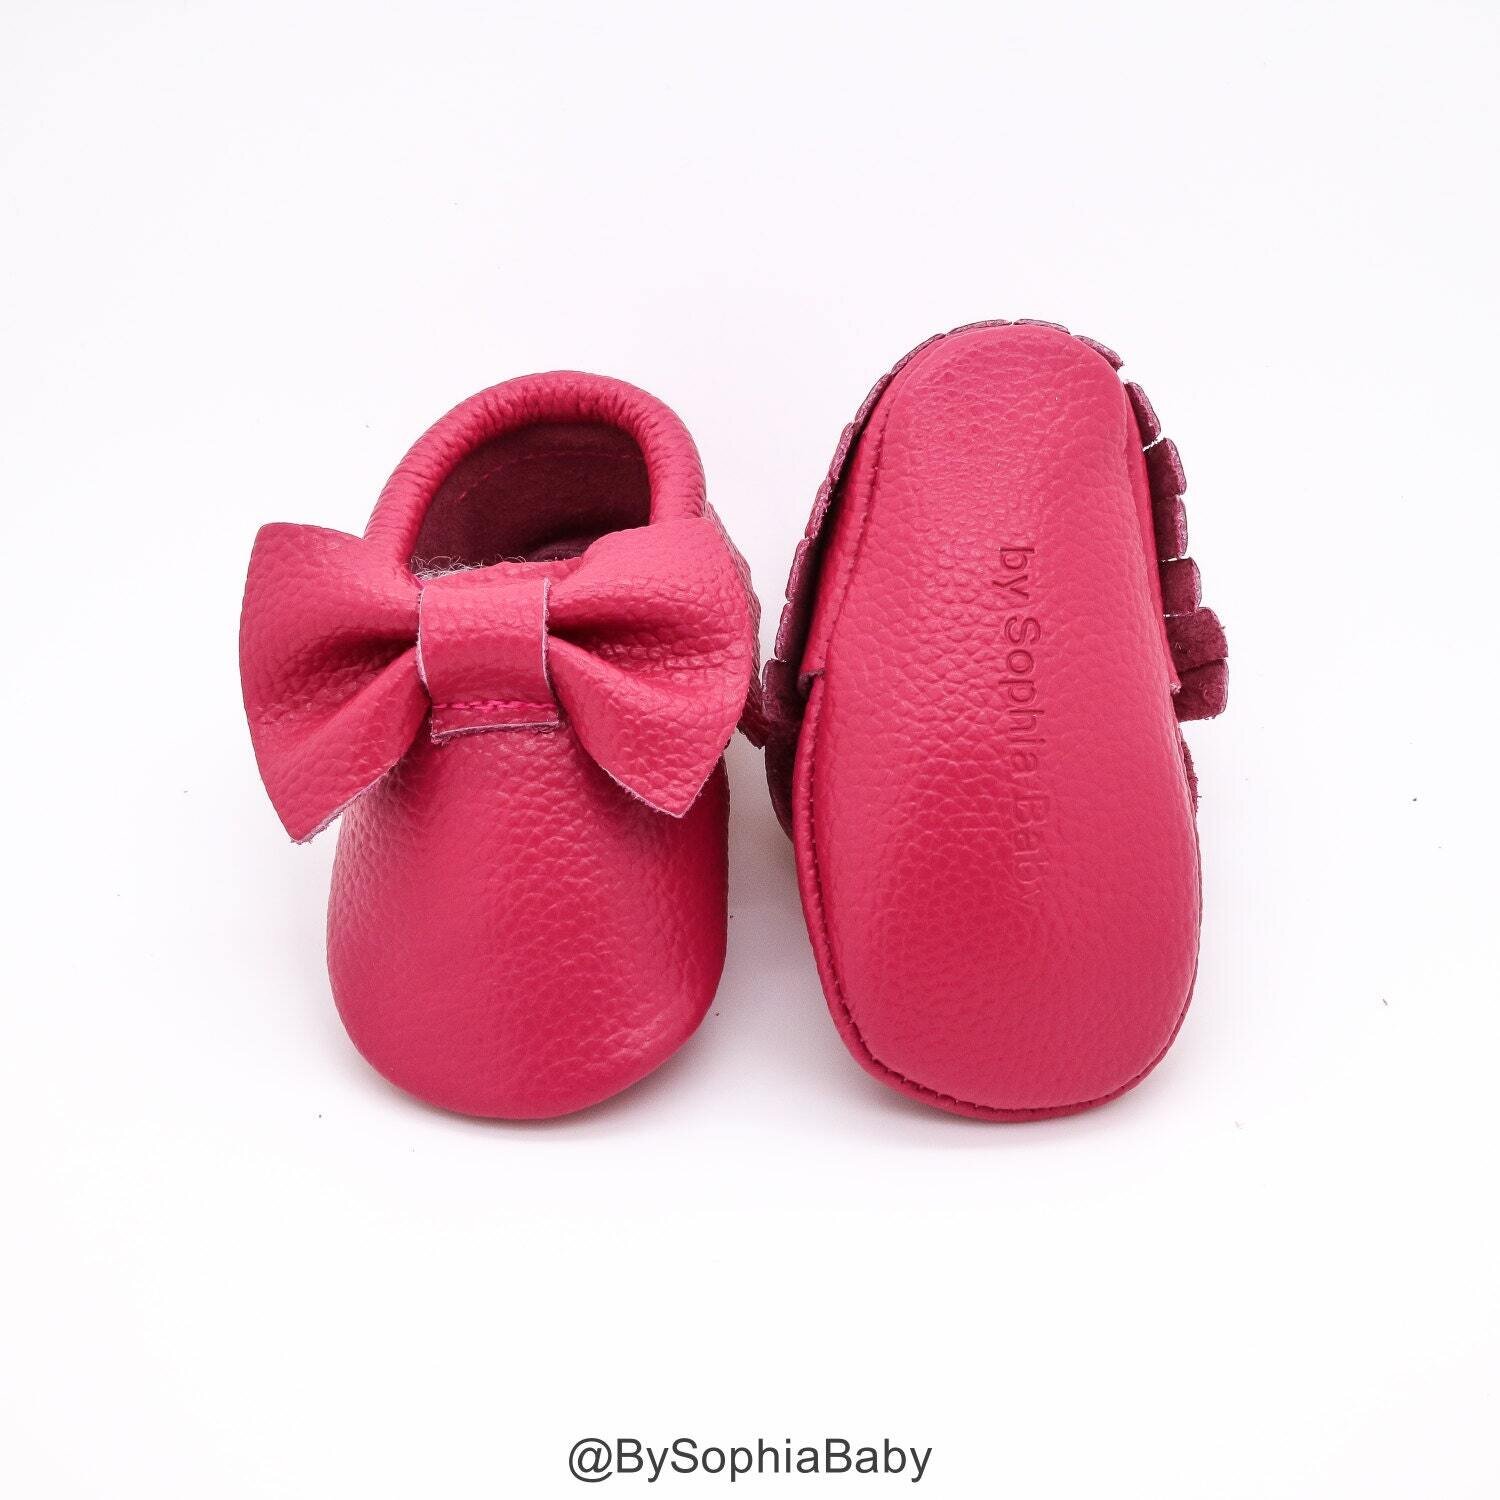 Baby Moccasins Baby Hot Pink Bow Moccasins Baby Leather Shoes Genuine Leather Moccs Toddler Moccasins Baby Moccs Baby Shower Gift